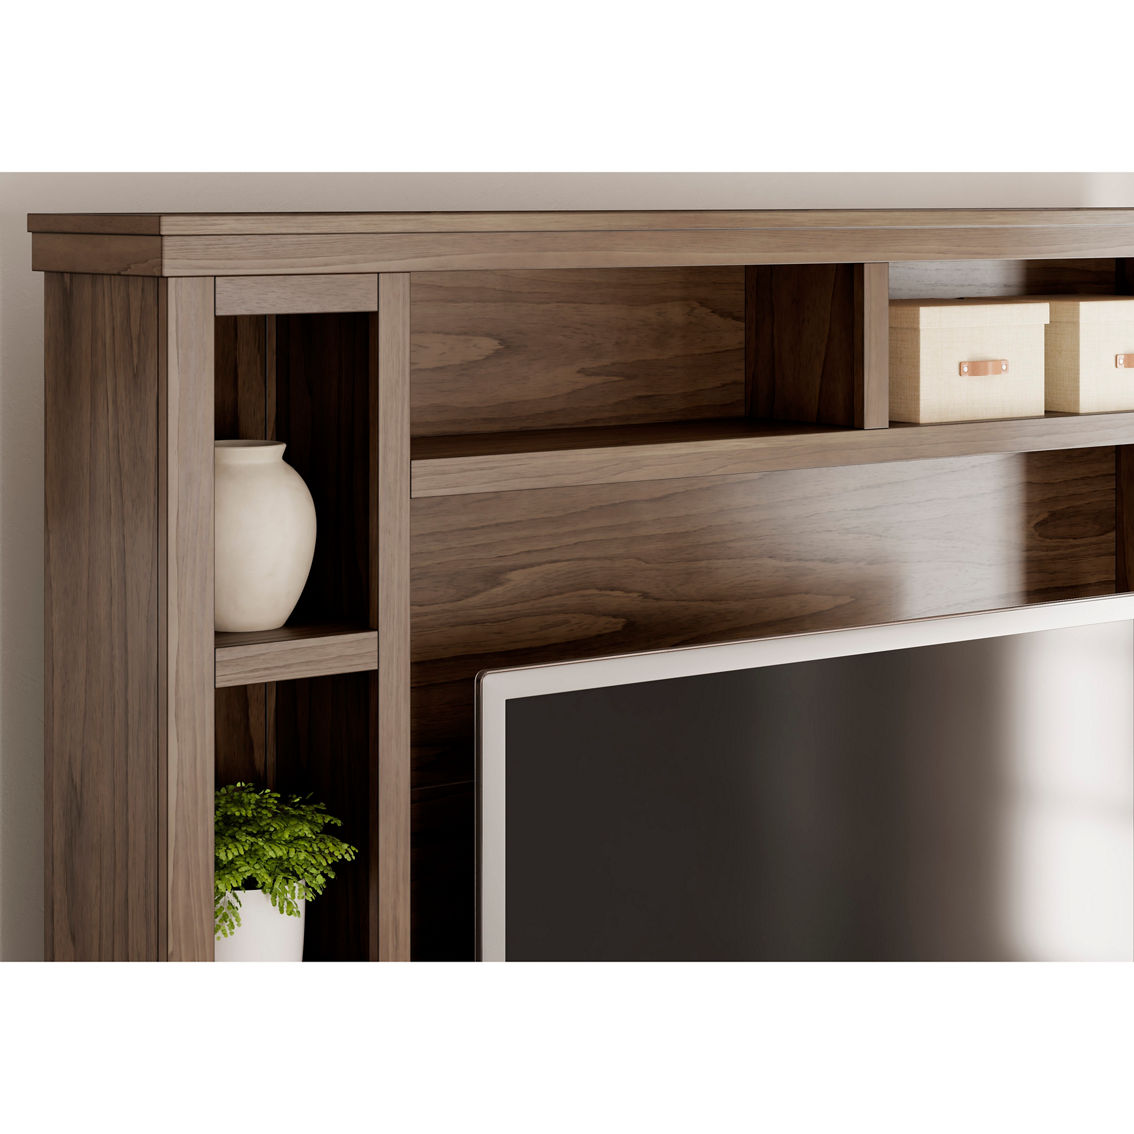 Signature Design by Ashley  Boardernest TV Stand with Hutch - Image 5 of 7